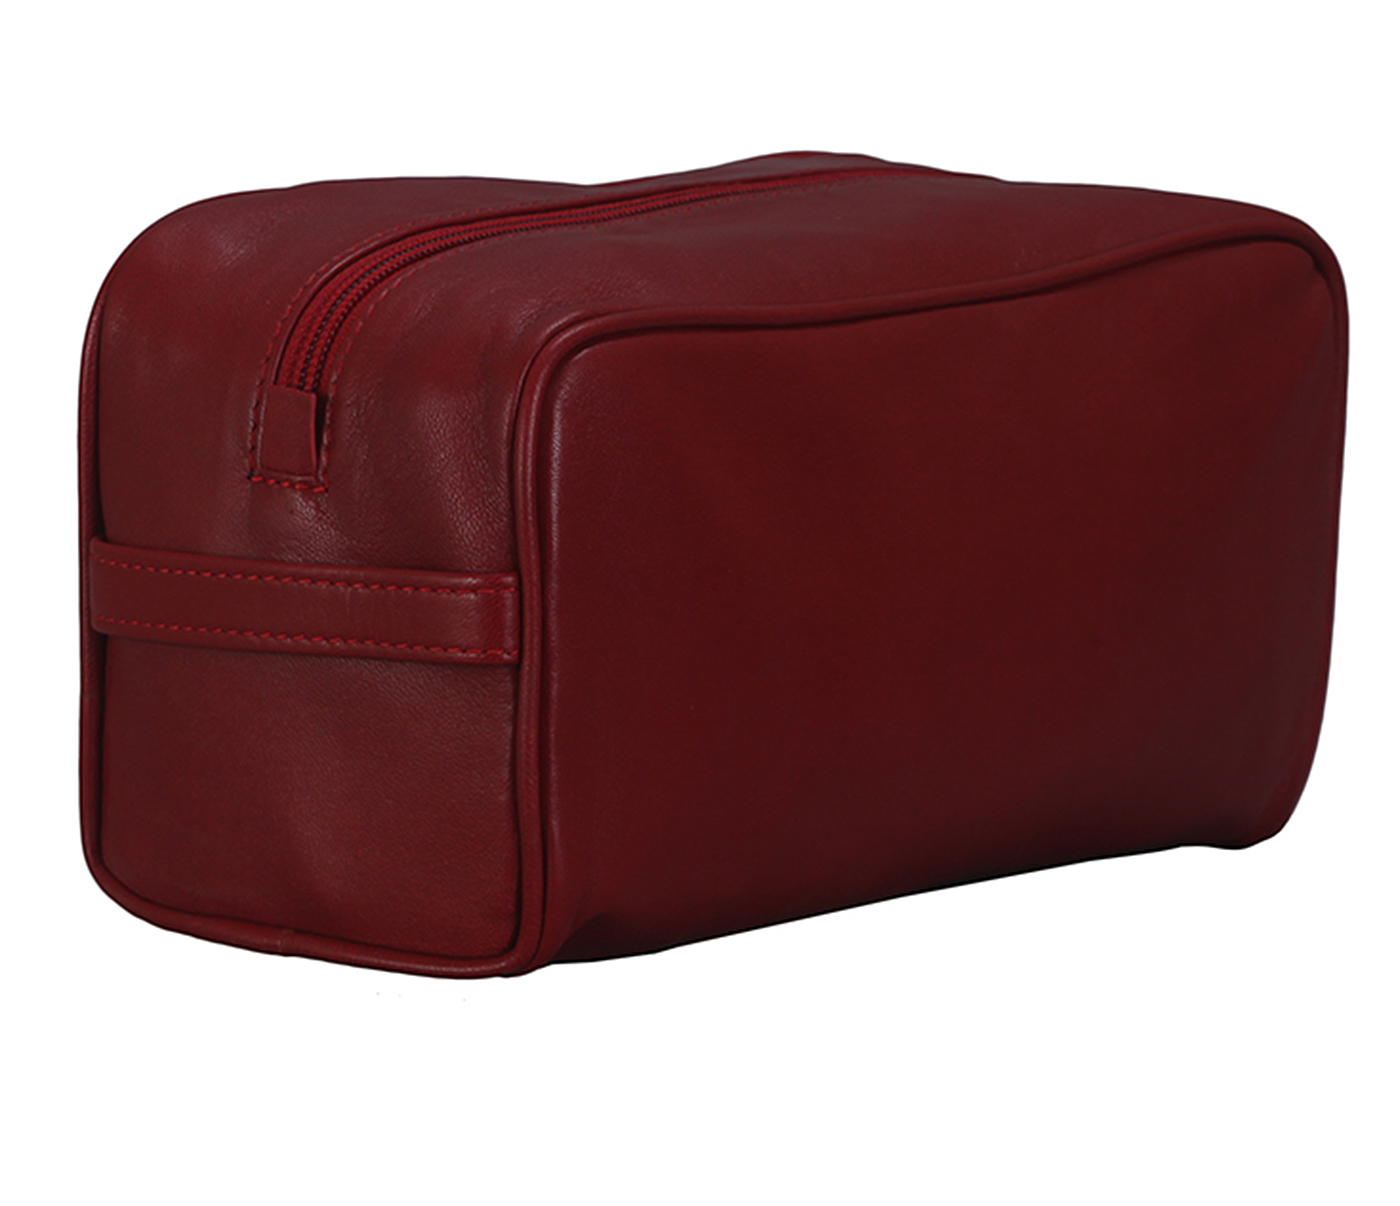 SC1--Unisex Wash & Toiletry travel Bag in Genuine Leather - Red